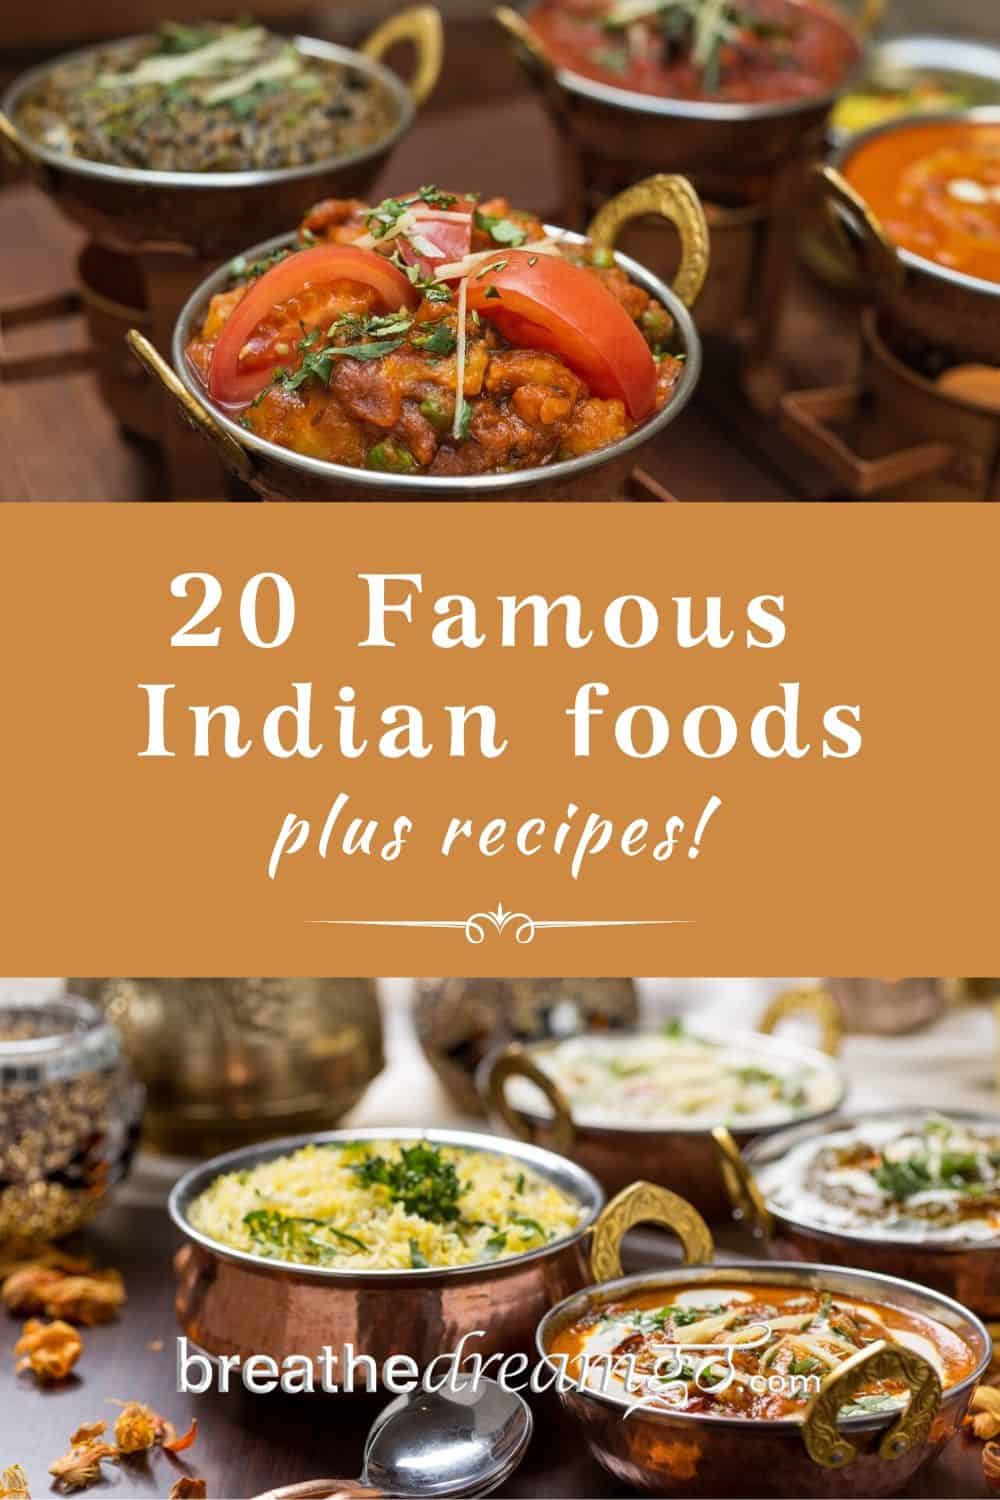 20 Famous Indian Foods with recipes